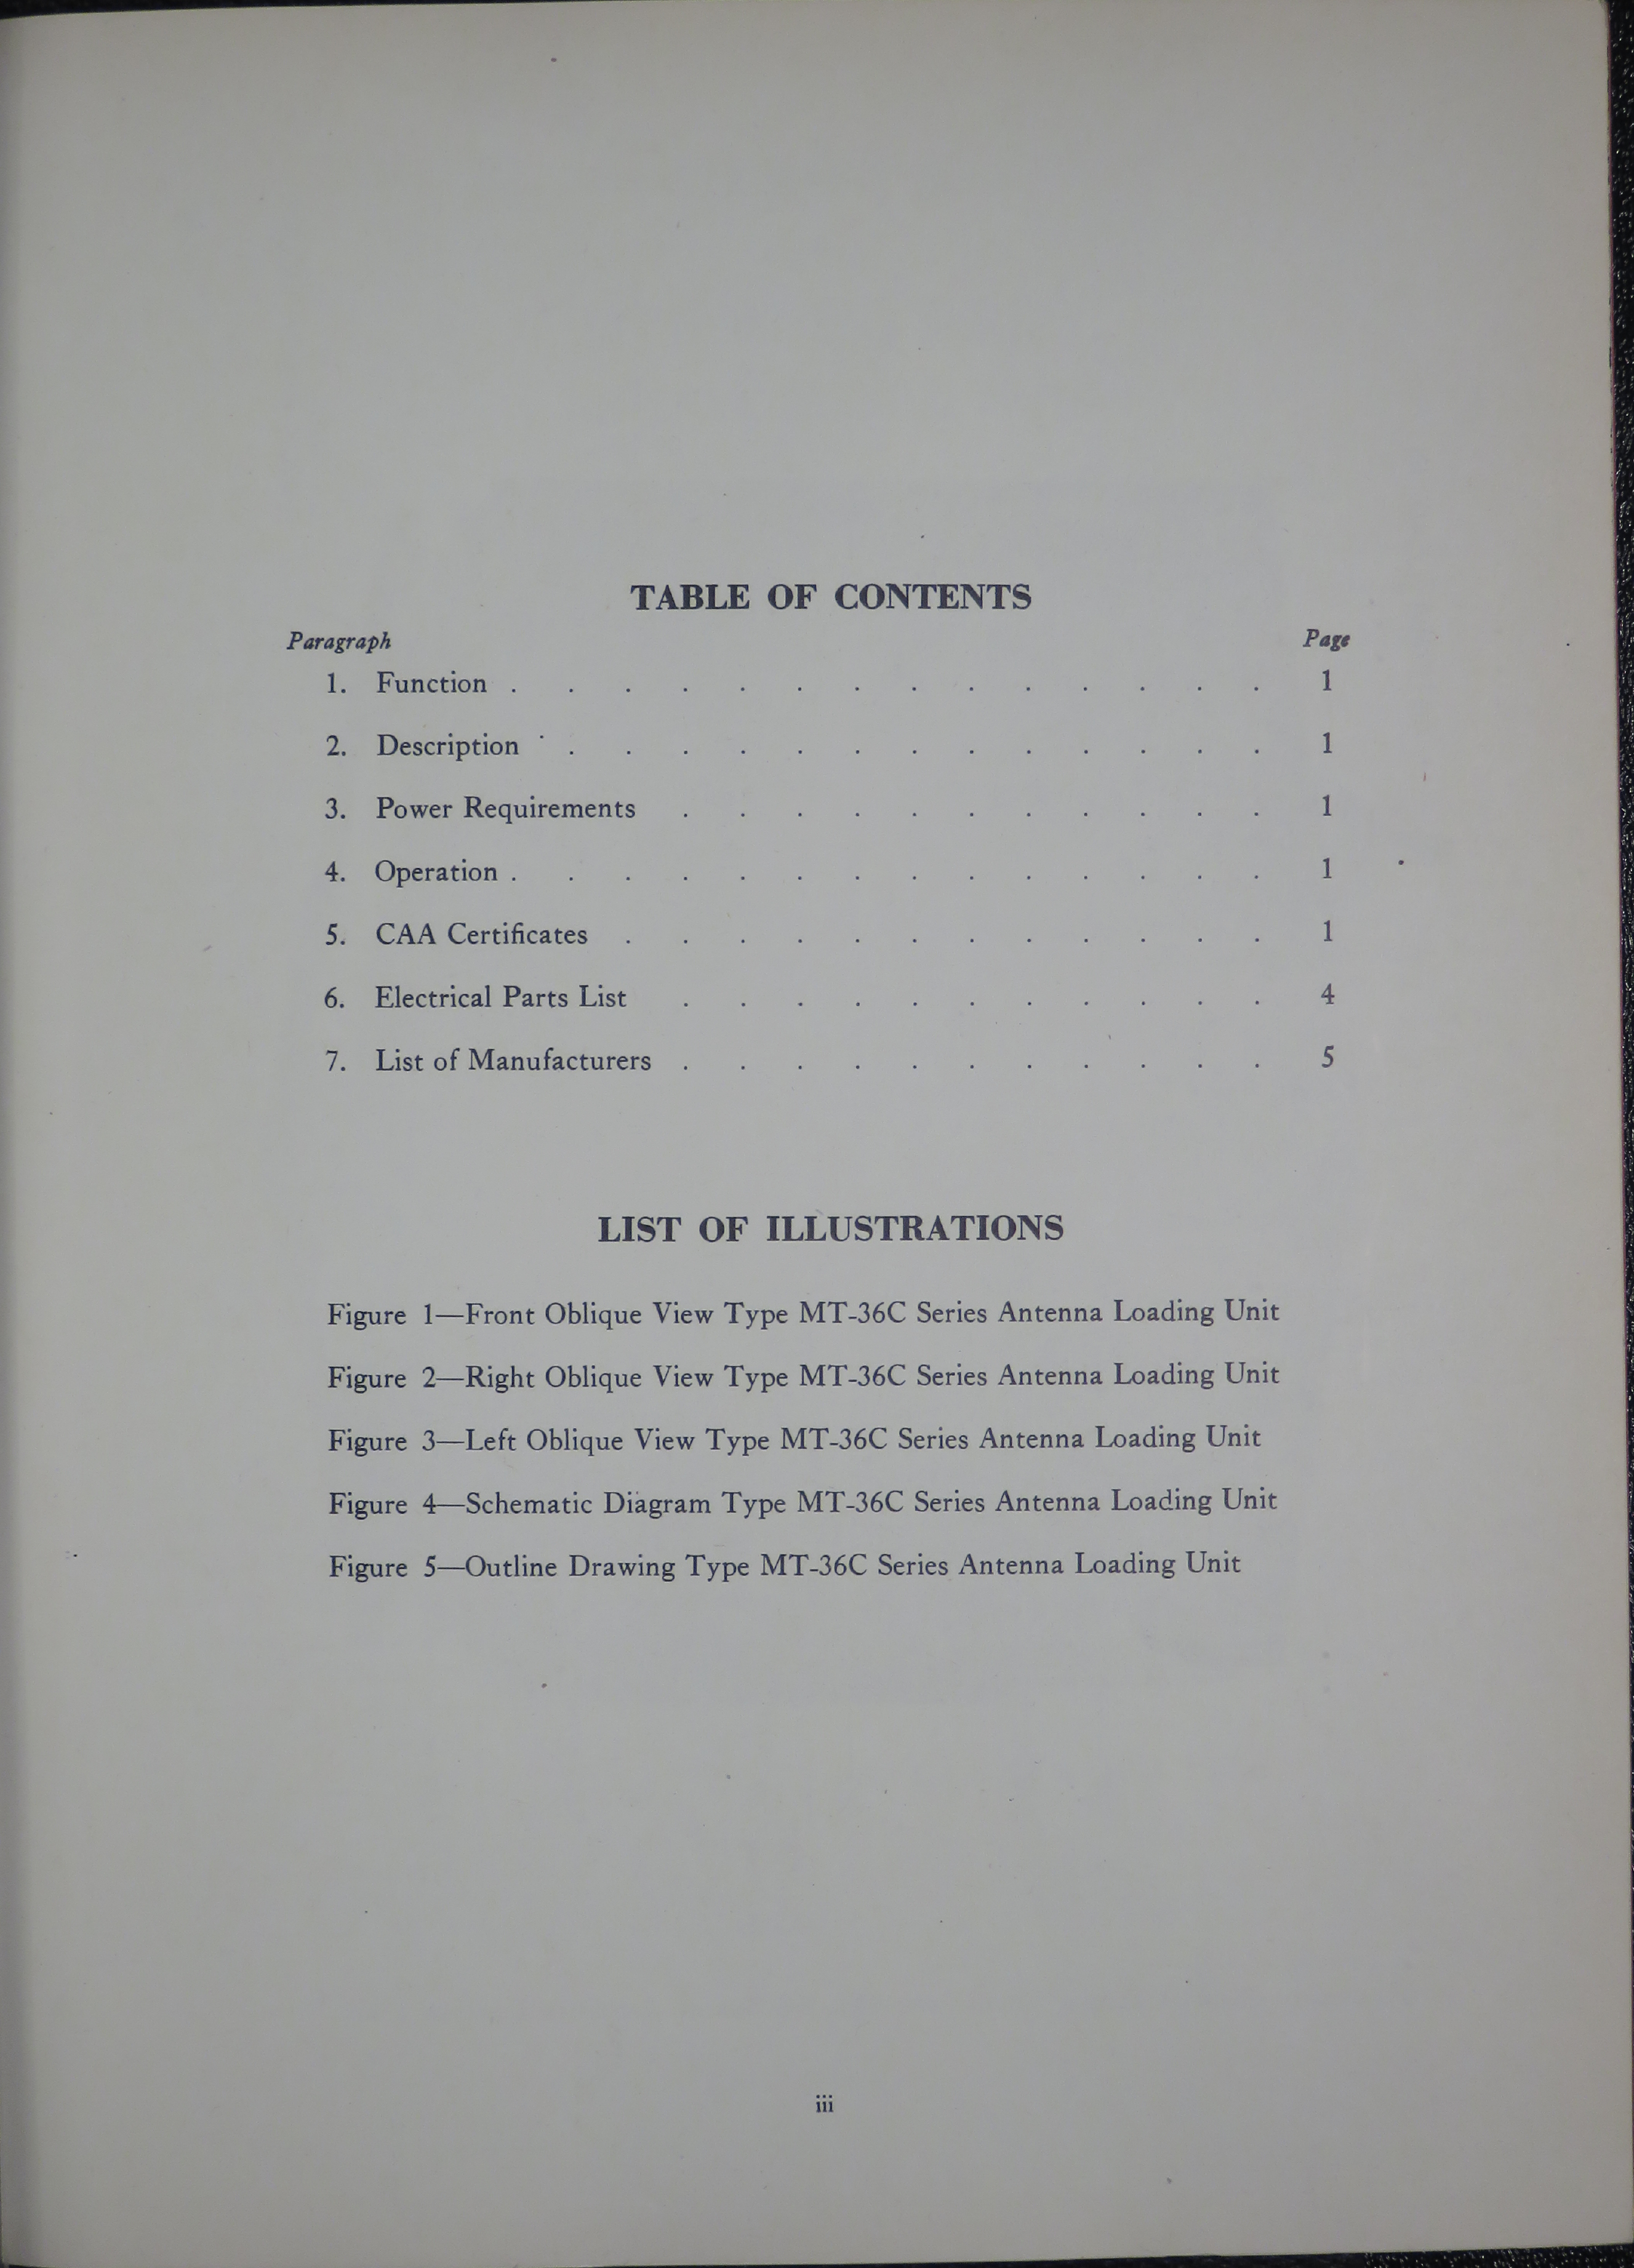 Sample page 5 from AirCorps Library document: Instruction Book for Types MT-36C and MT-36C-24 Antenna Loading Units